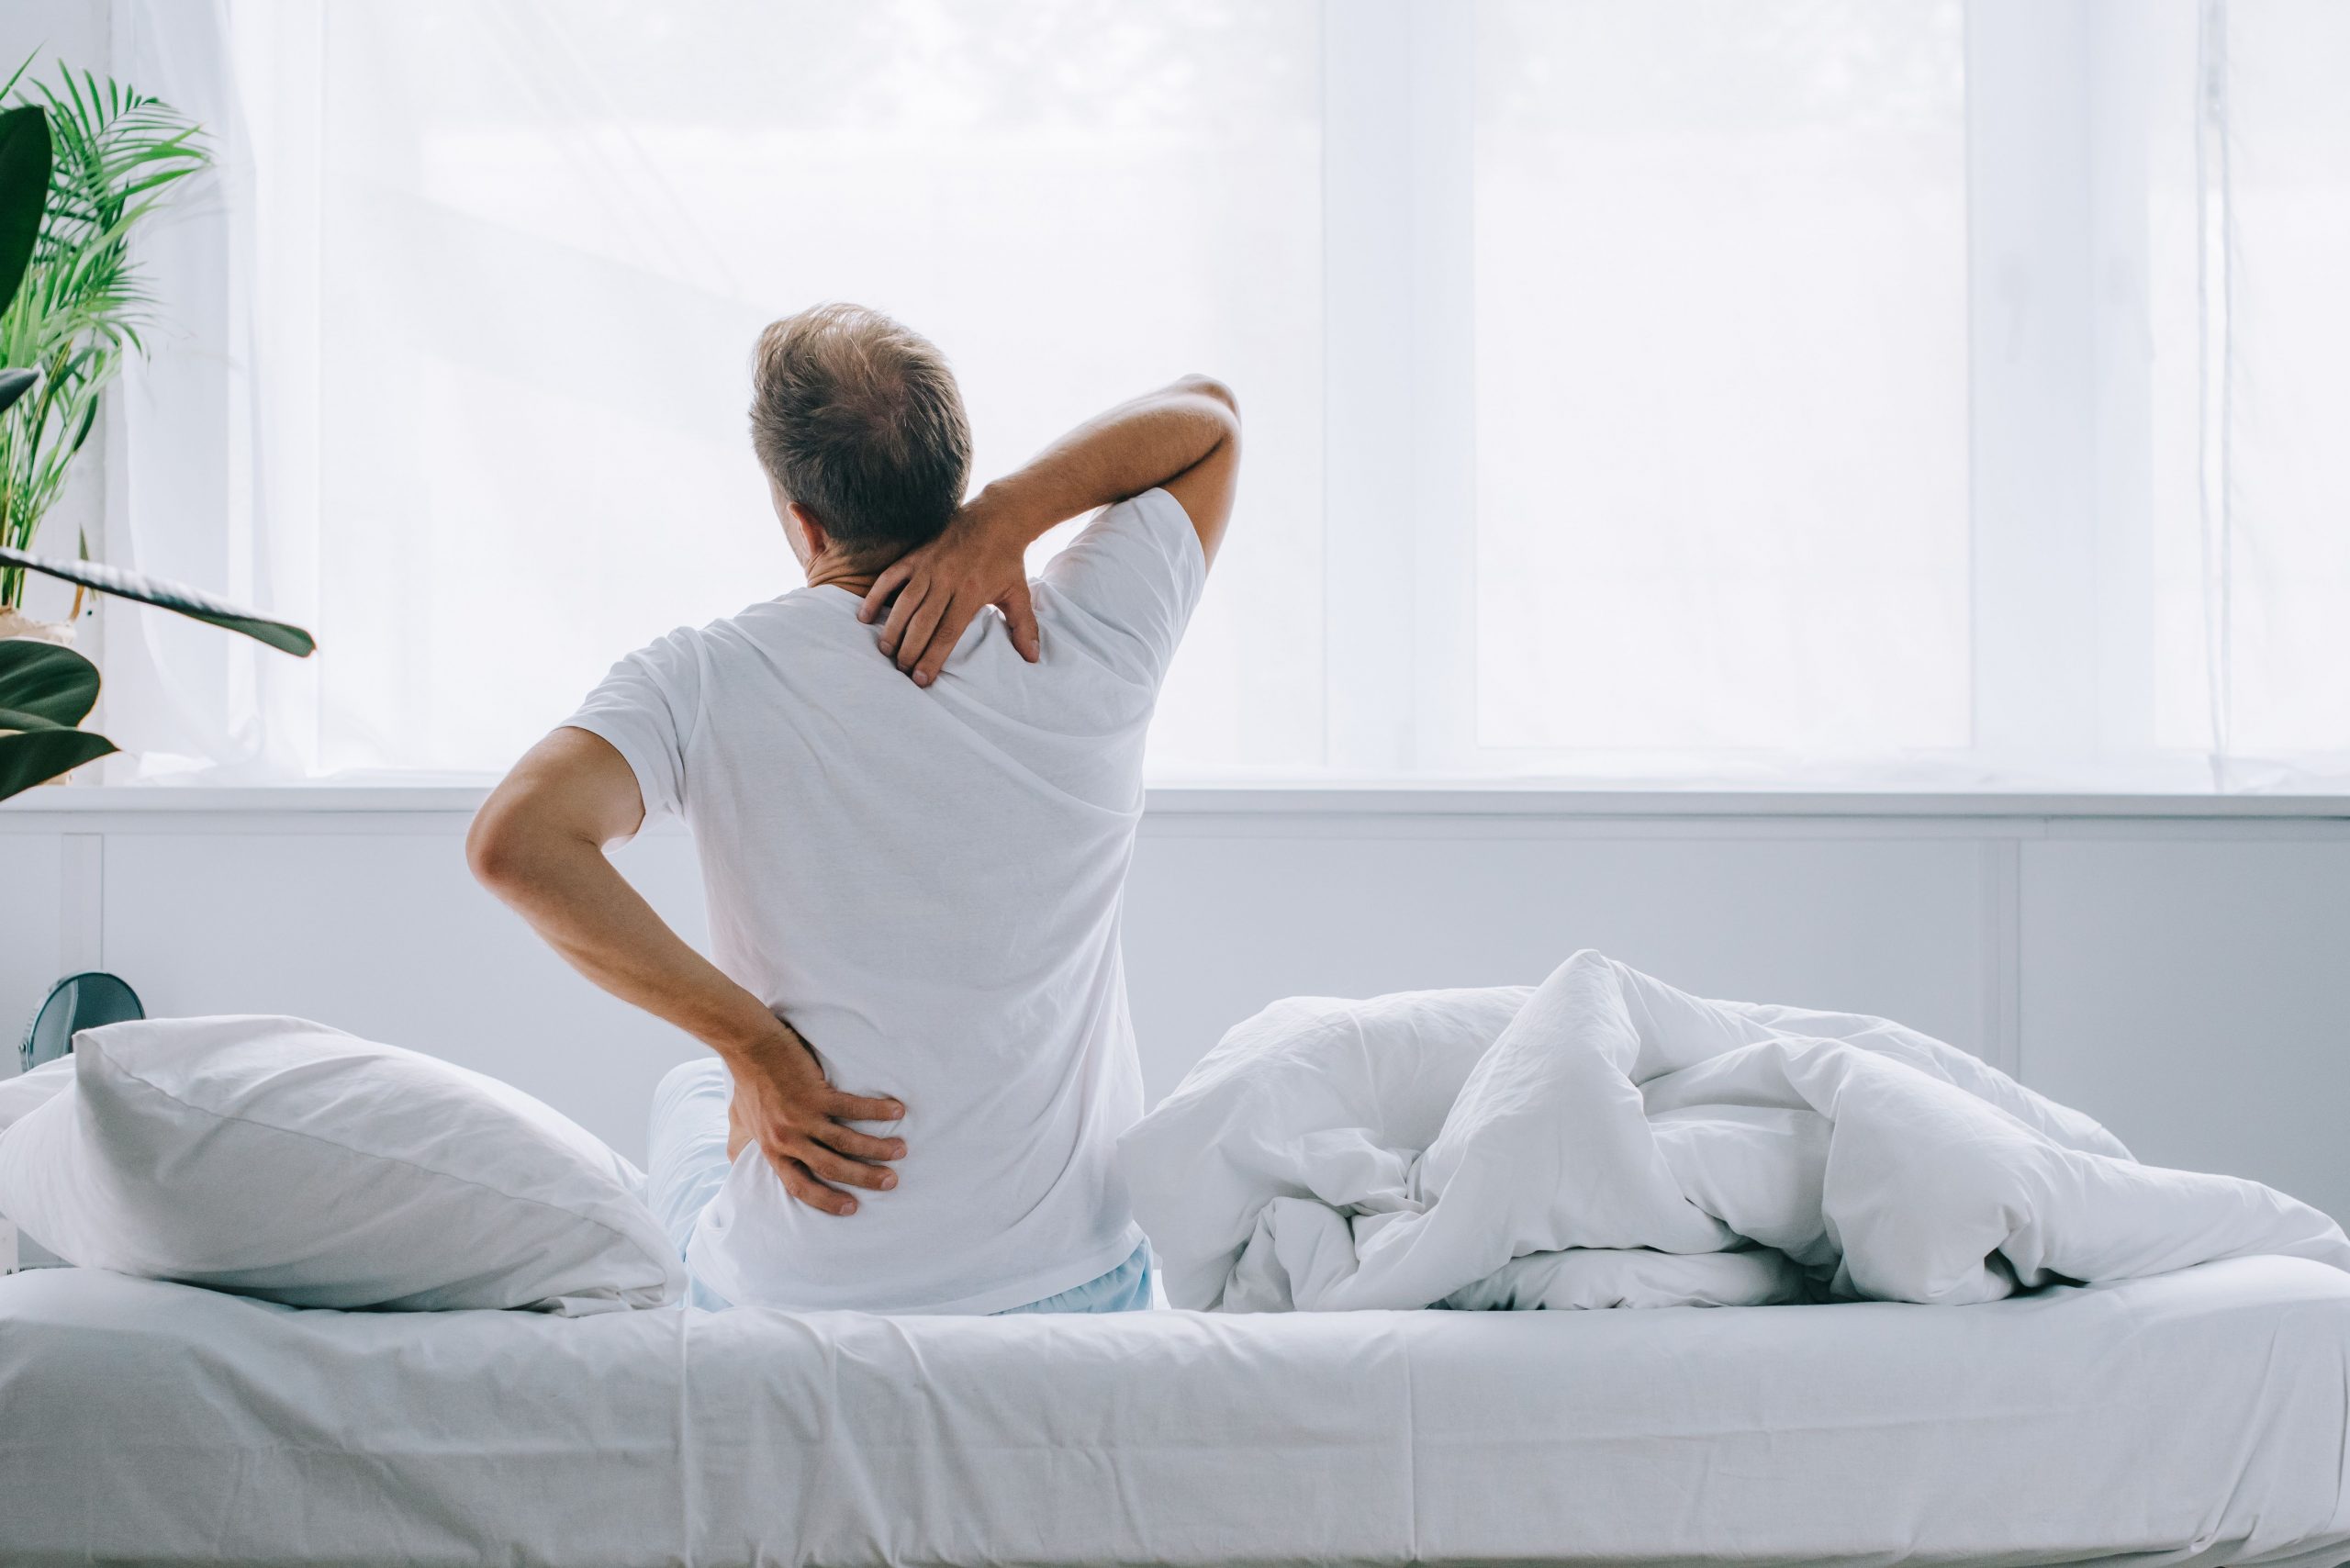 Spinal Health Week - Home back pain crisis